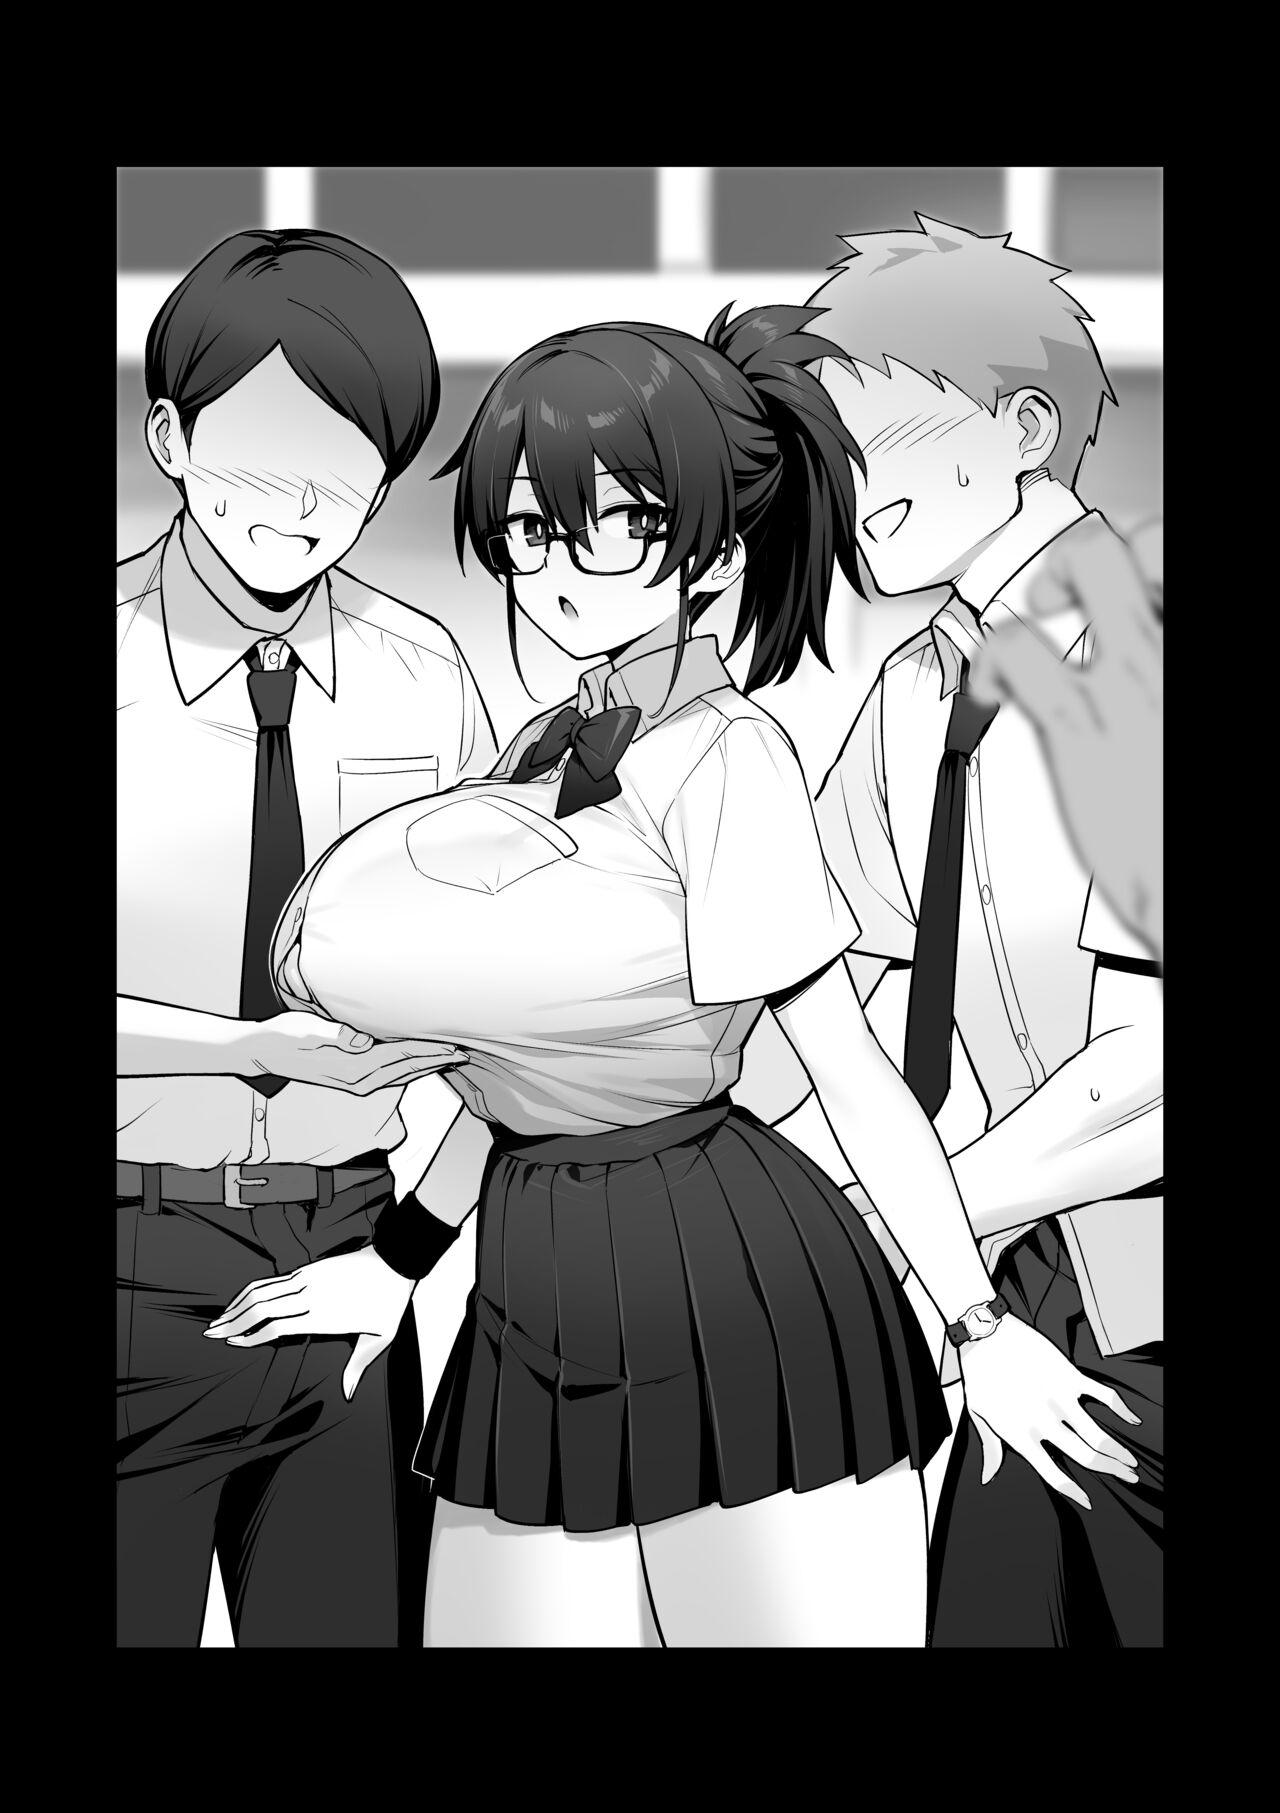 Rumor Has It That The New Chairman of Disciplinary Committee Has Huge Breasts. 26